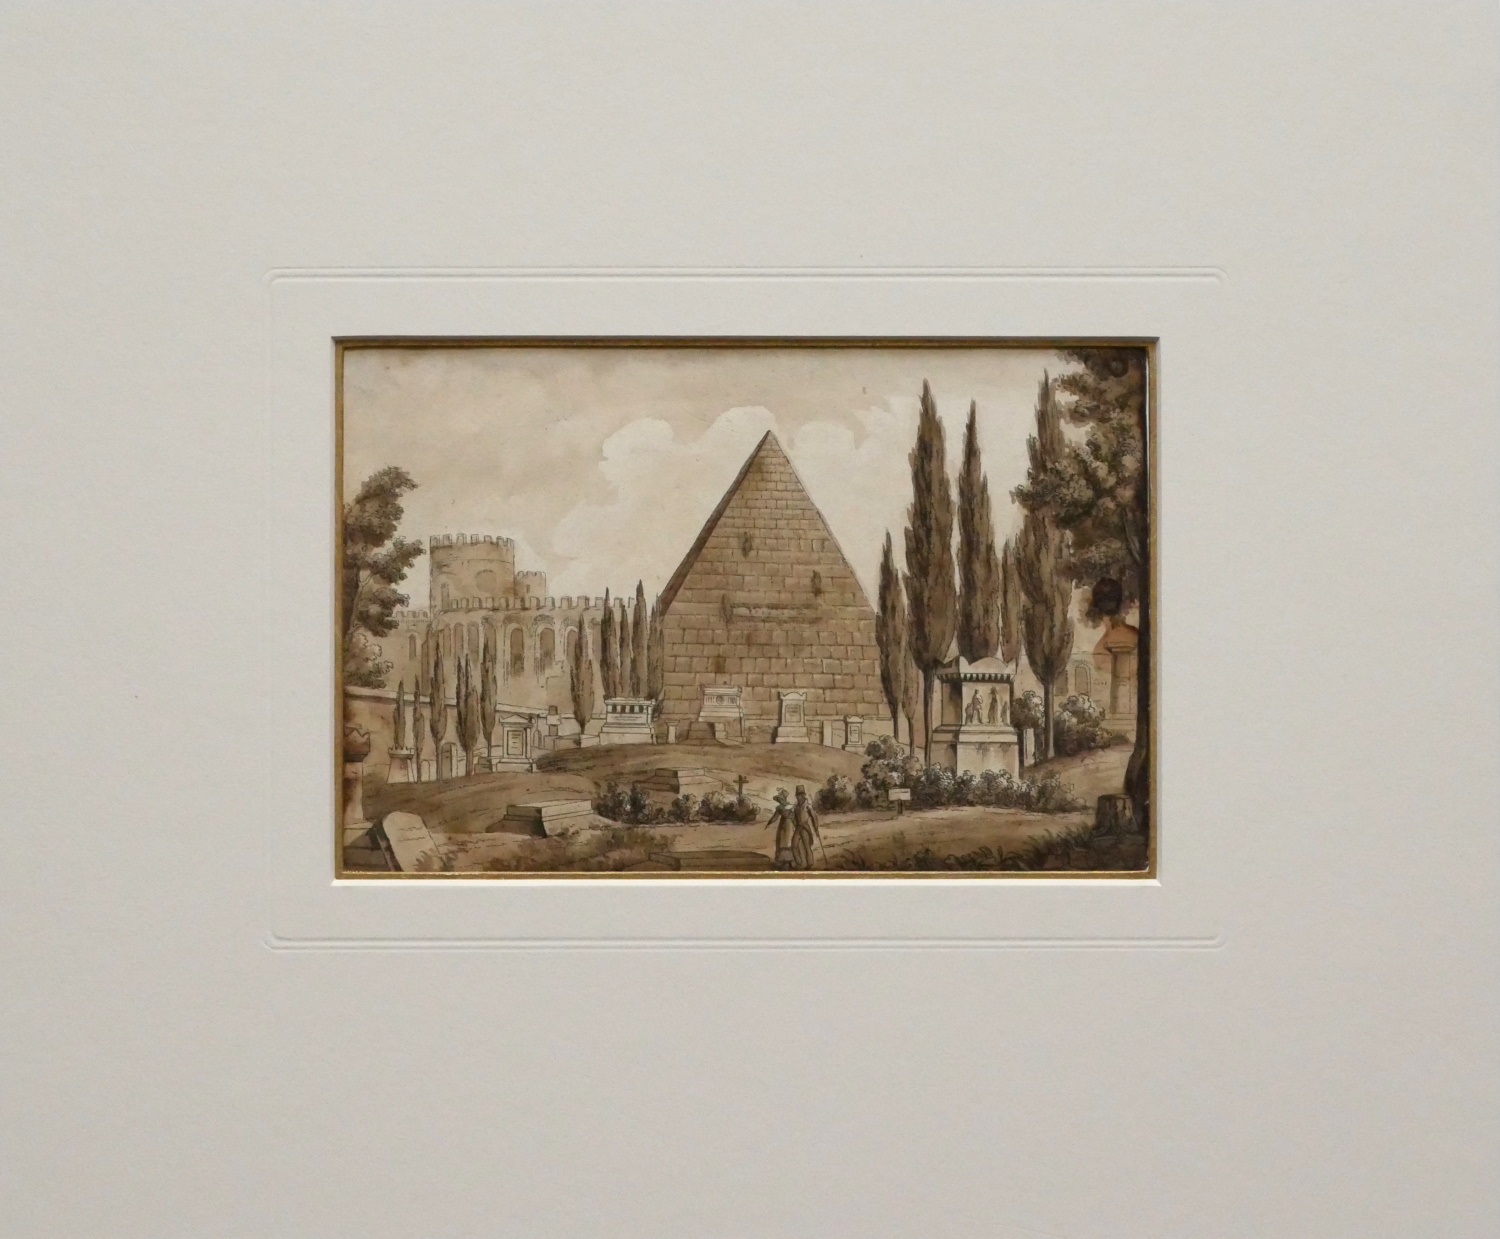 Unknown Artist (Early 19thc.) – Protestant Cemetery near the Pyramid of Caius Cestius, Rome